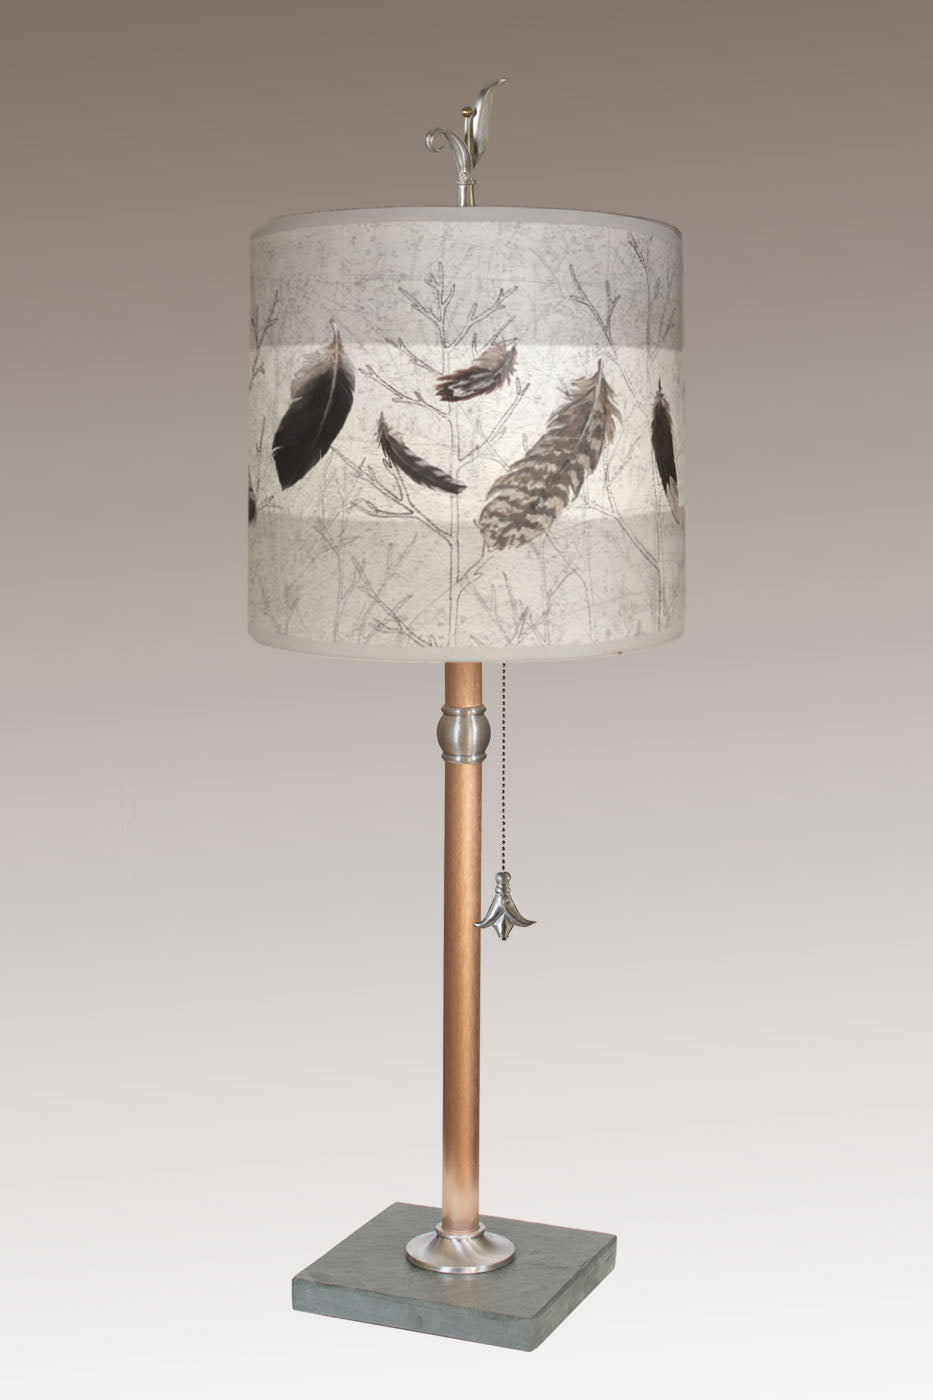 Copper Table Lamp with Medium Drum Shade in Feathers in Pebble